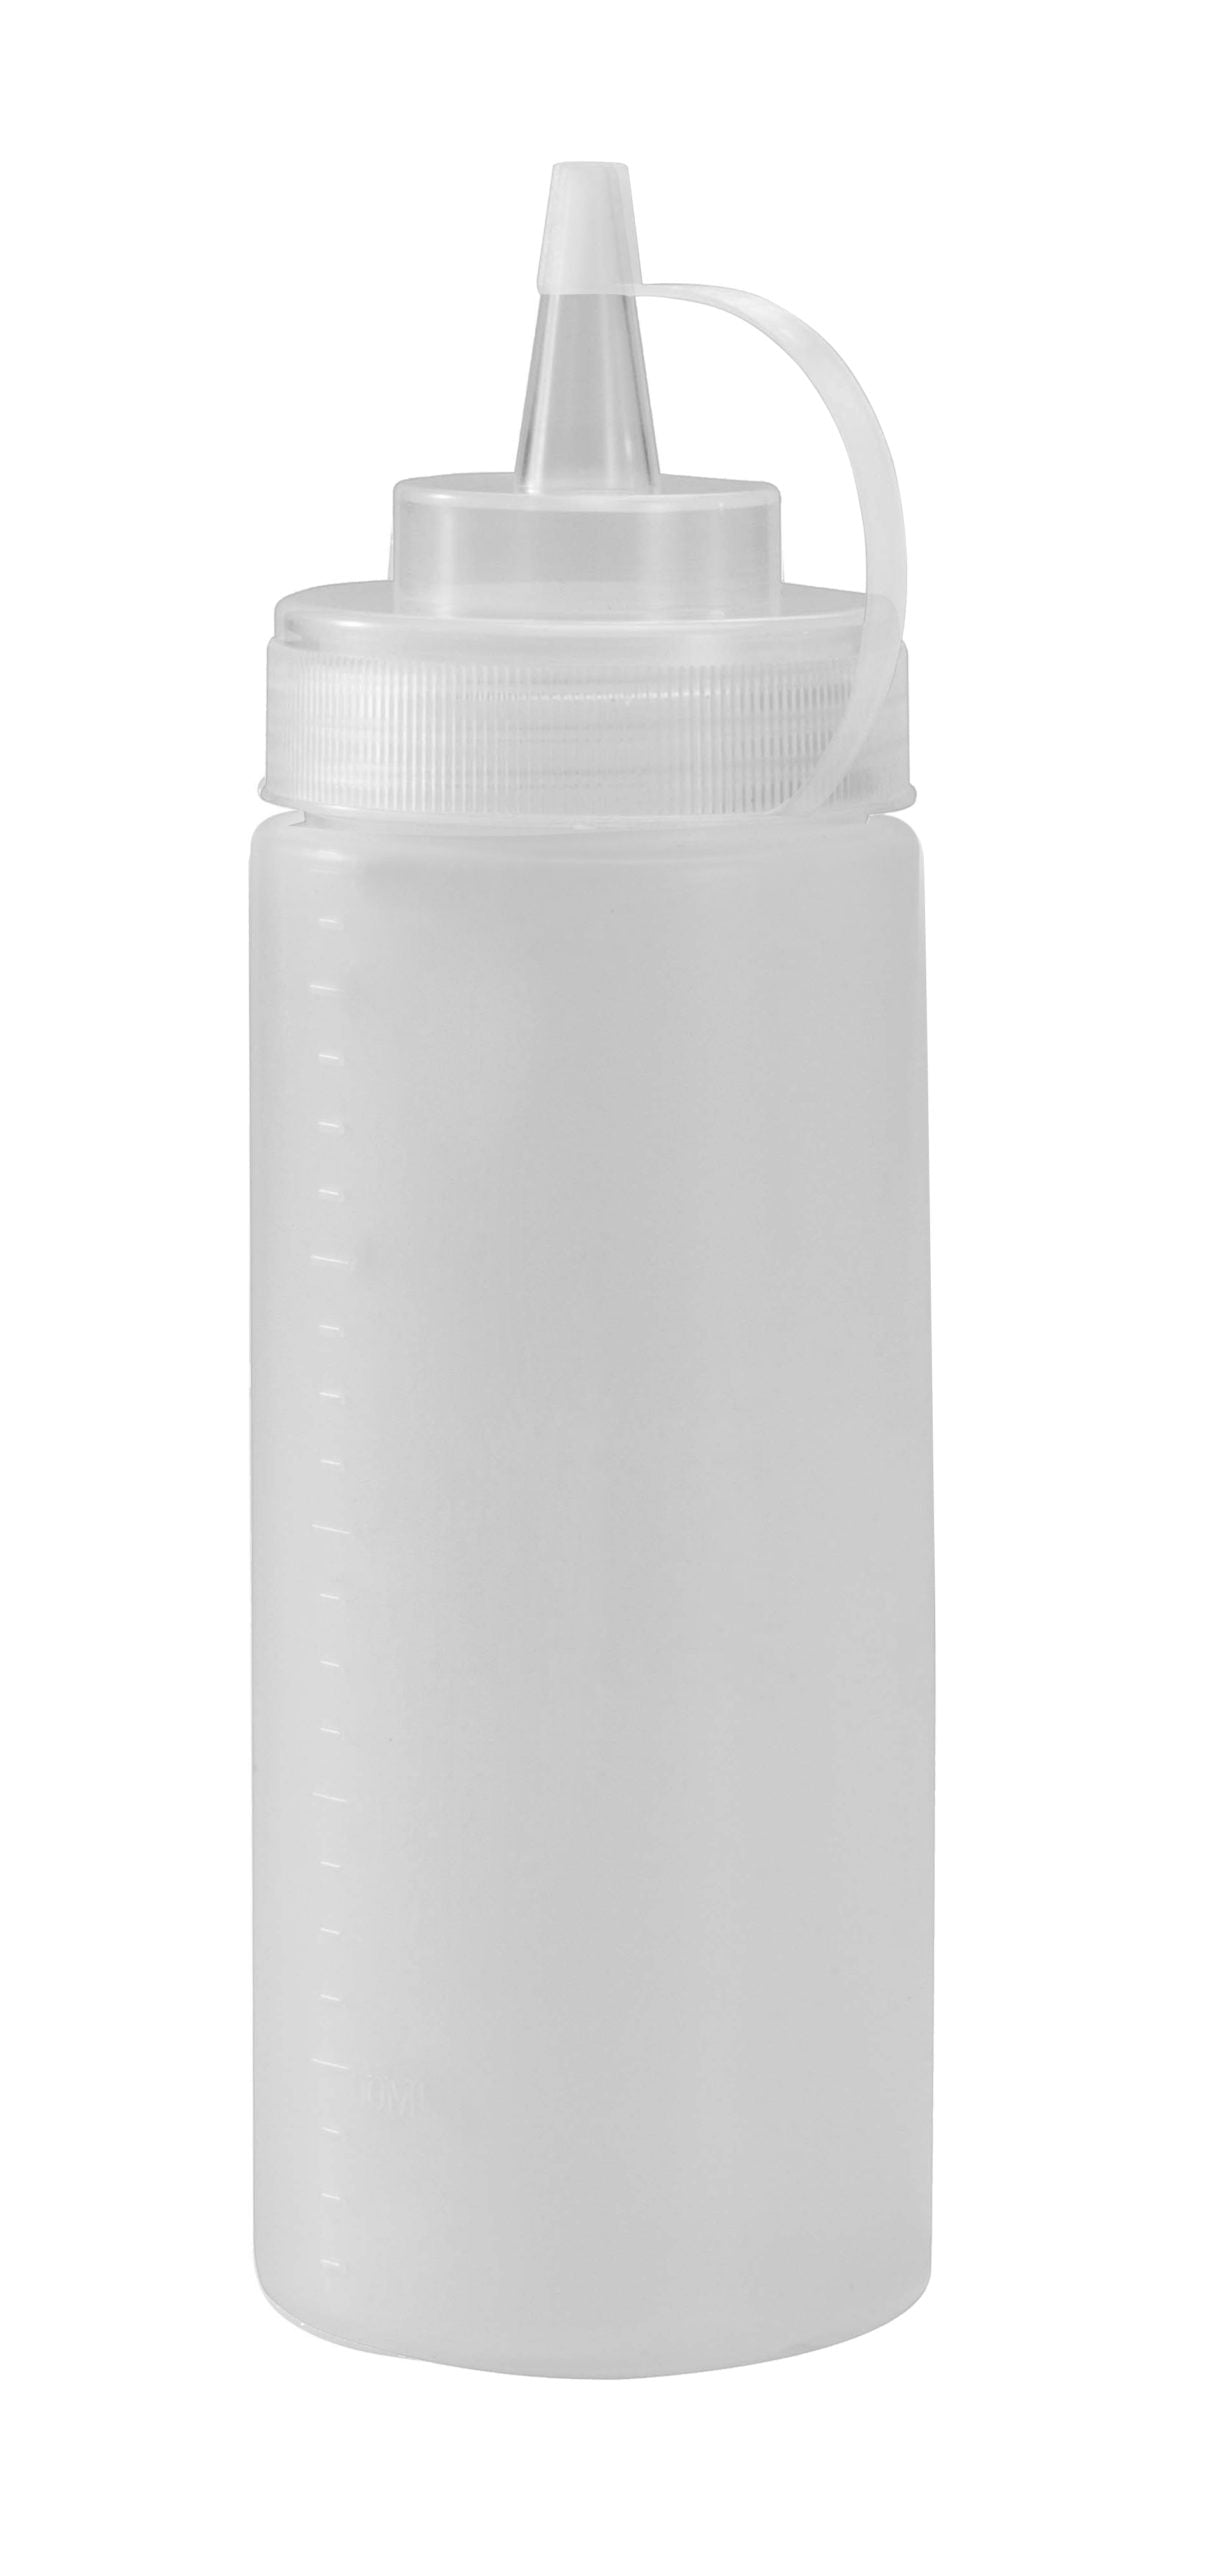 Castro - Clear Plastic Squeeze Bottle With Lid, 12 Oz